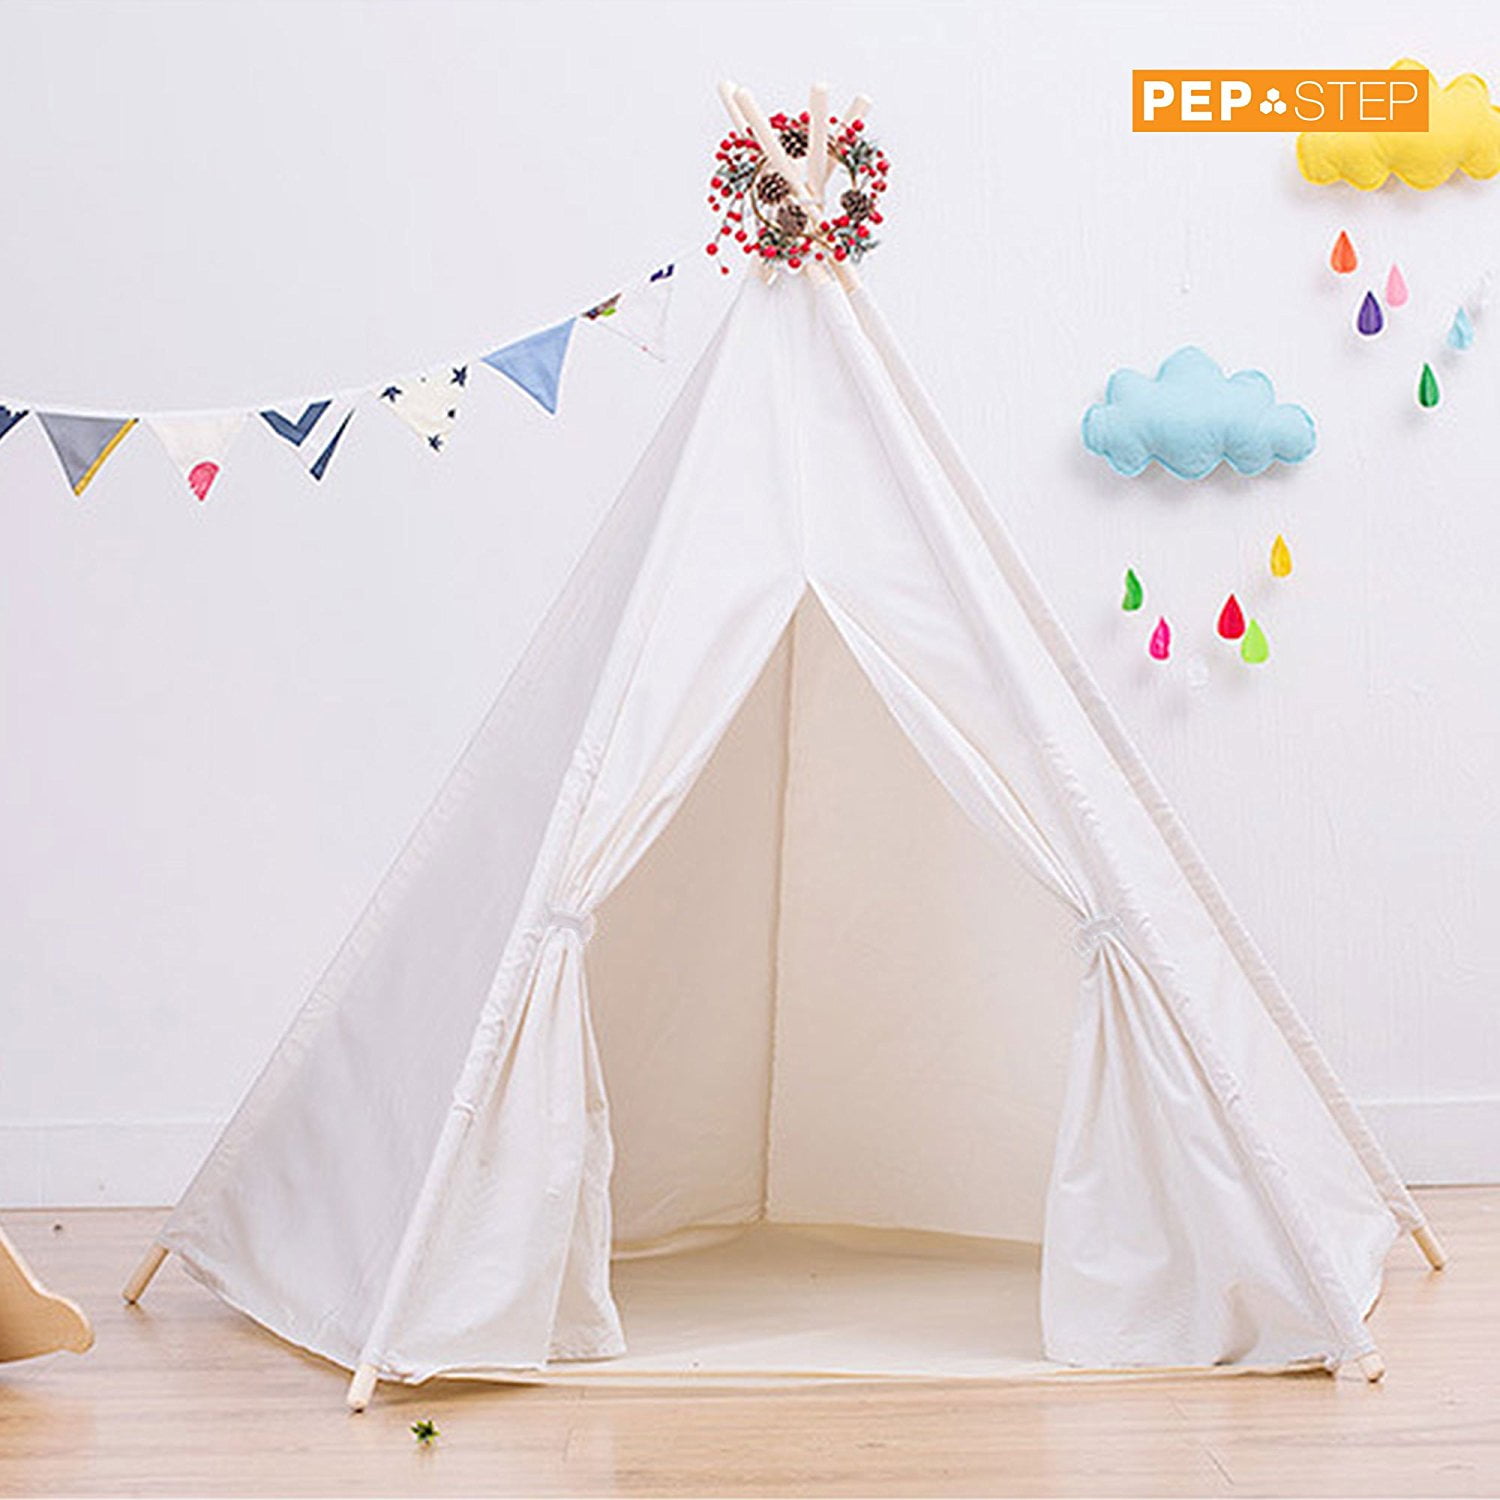 PEP-STEP Large Cotton Canvas TeePee Tent - Fordable 6 Feet Tall - 5 Poles -  Customizable white Cotton Tent - Childrens TeePee Tent High Quality Kids 